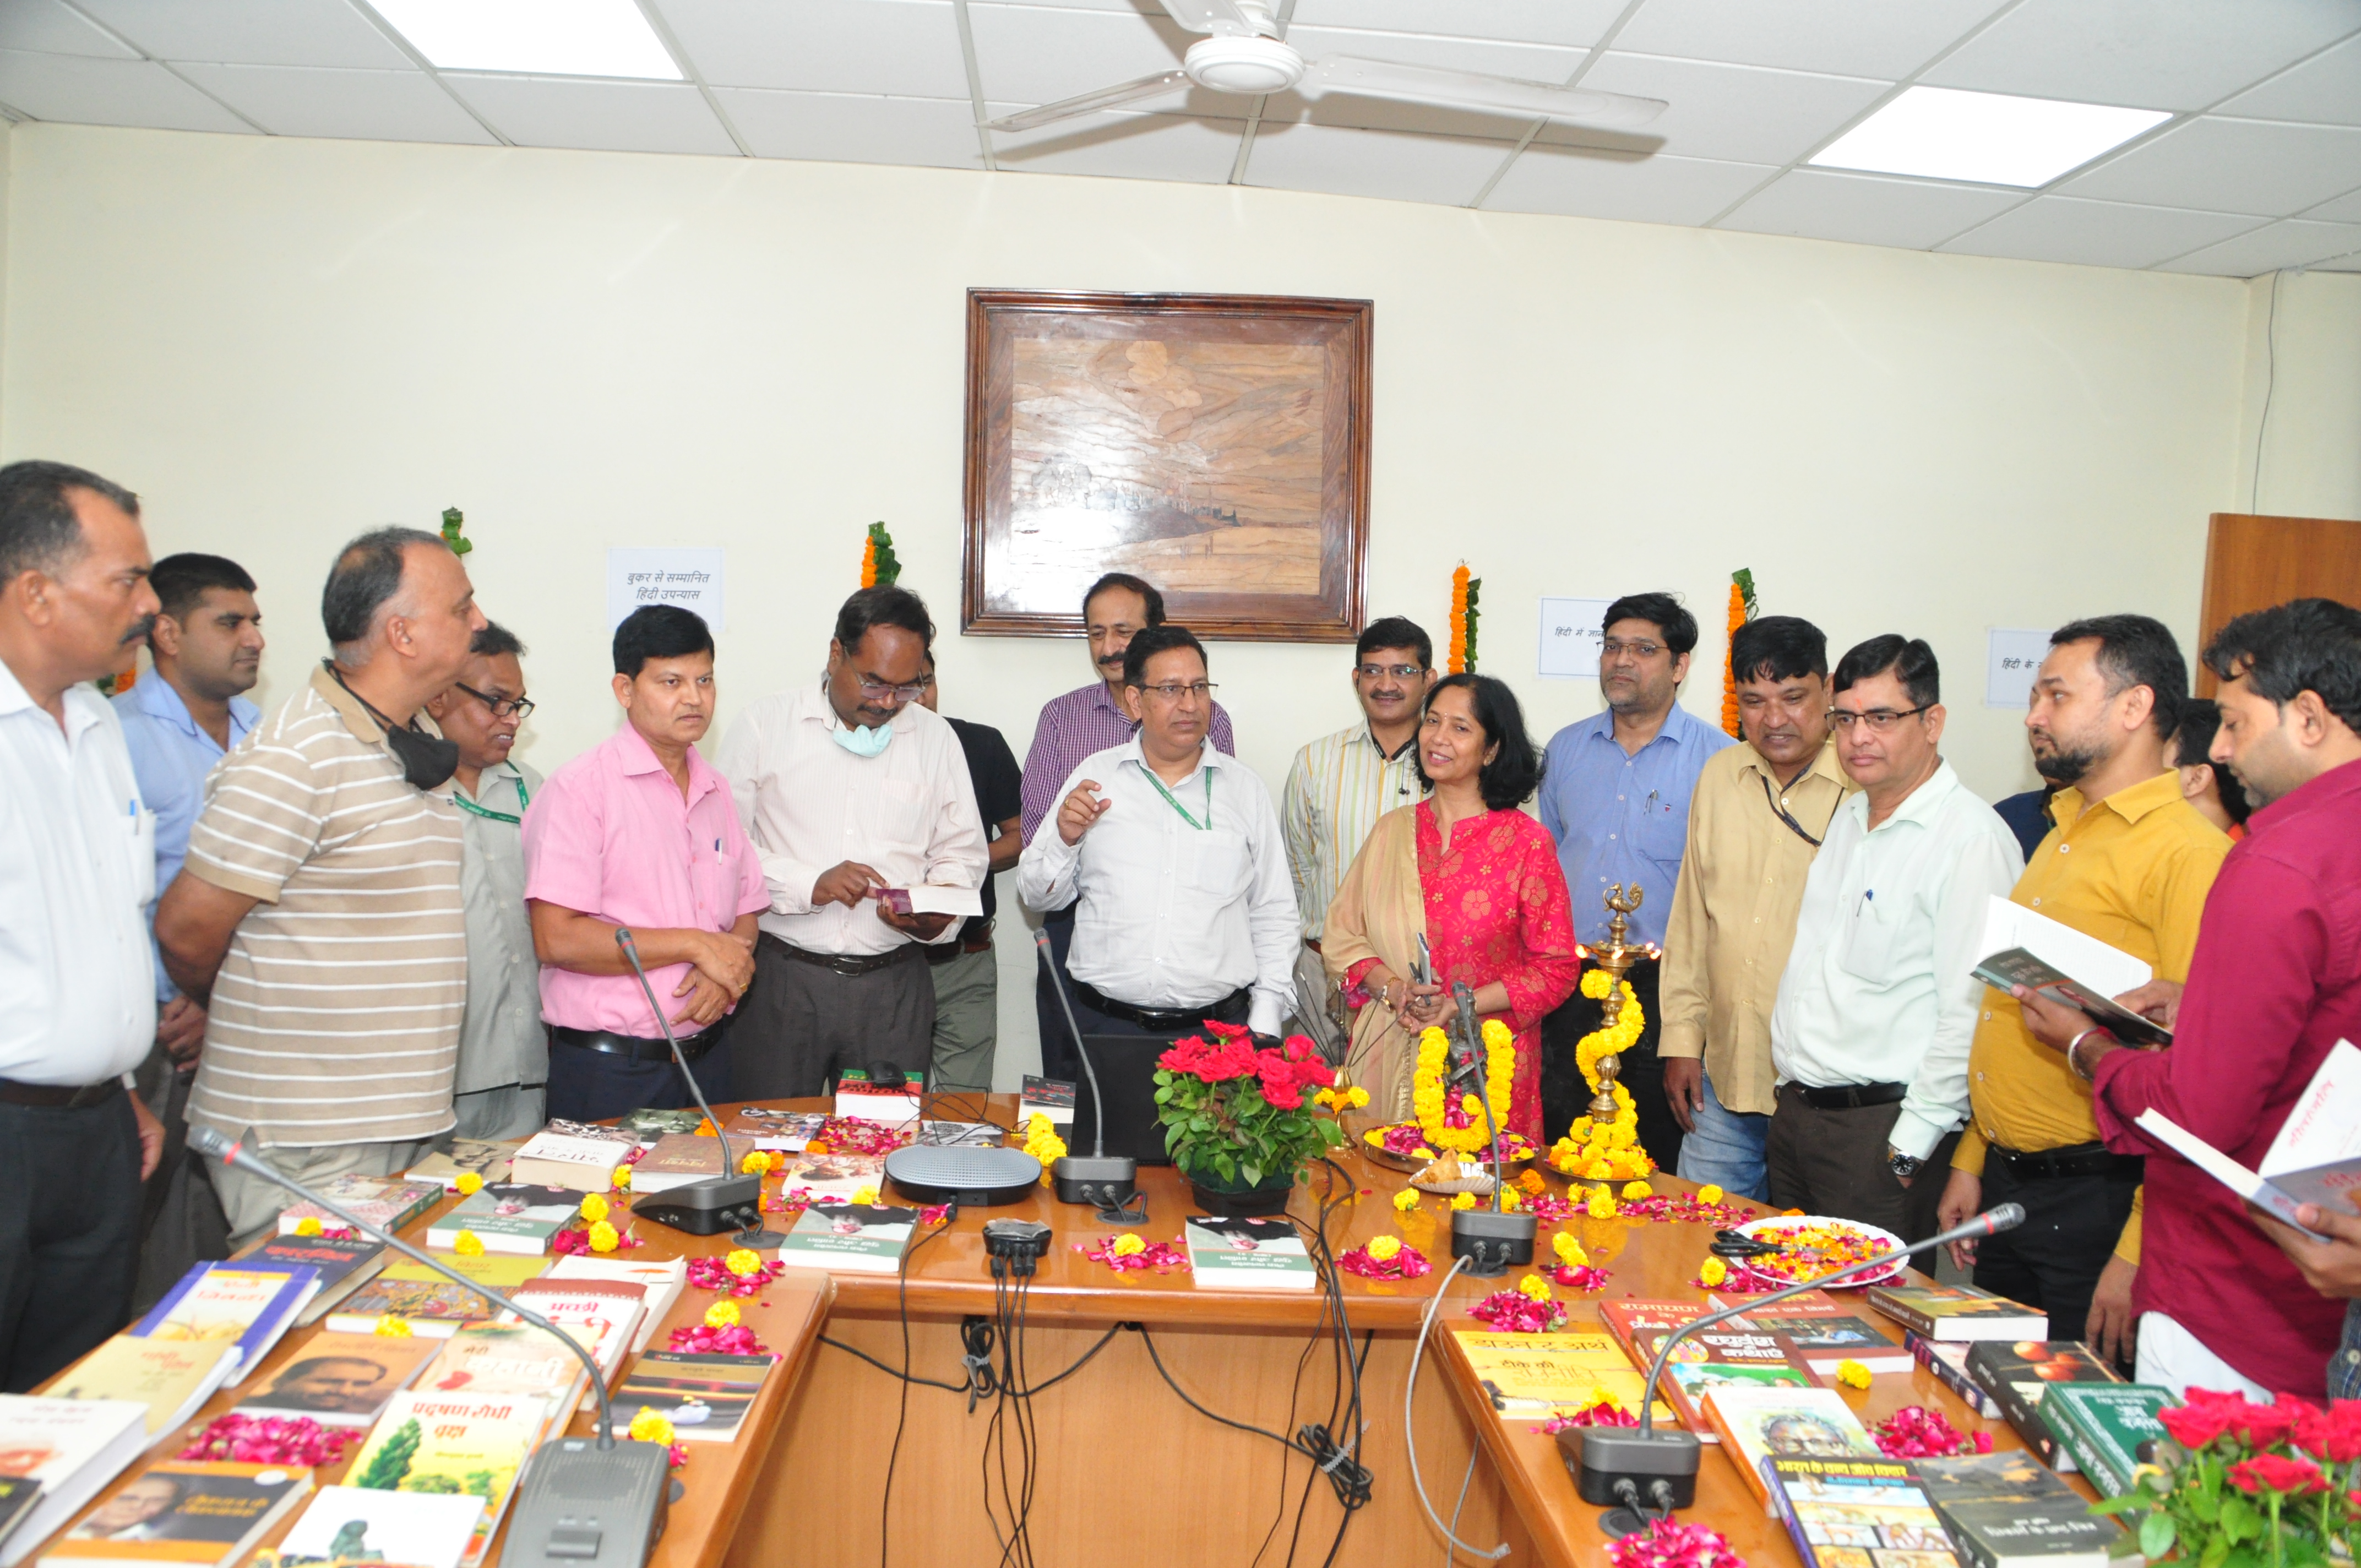 Officers and officials of the office inspecting the books in the Hindi book exhibition